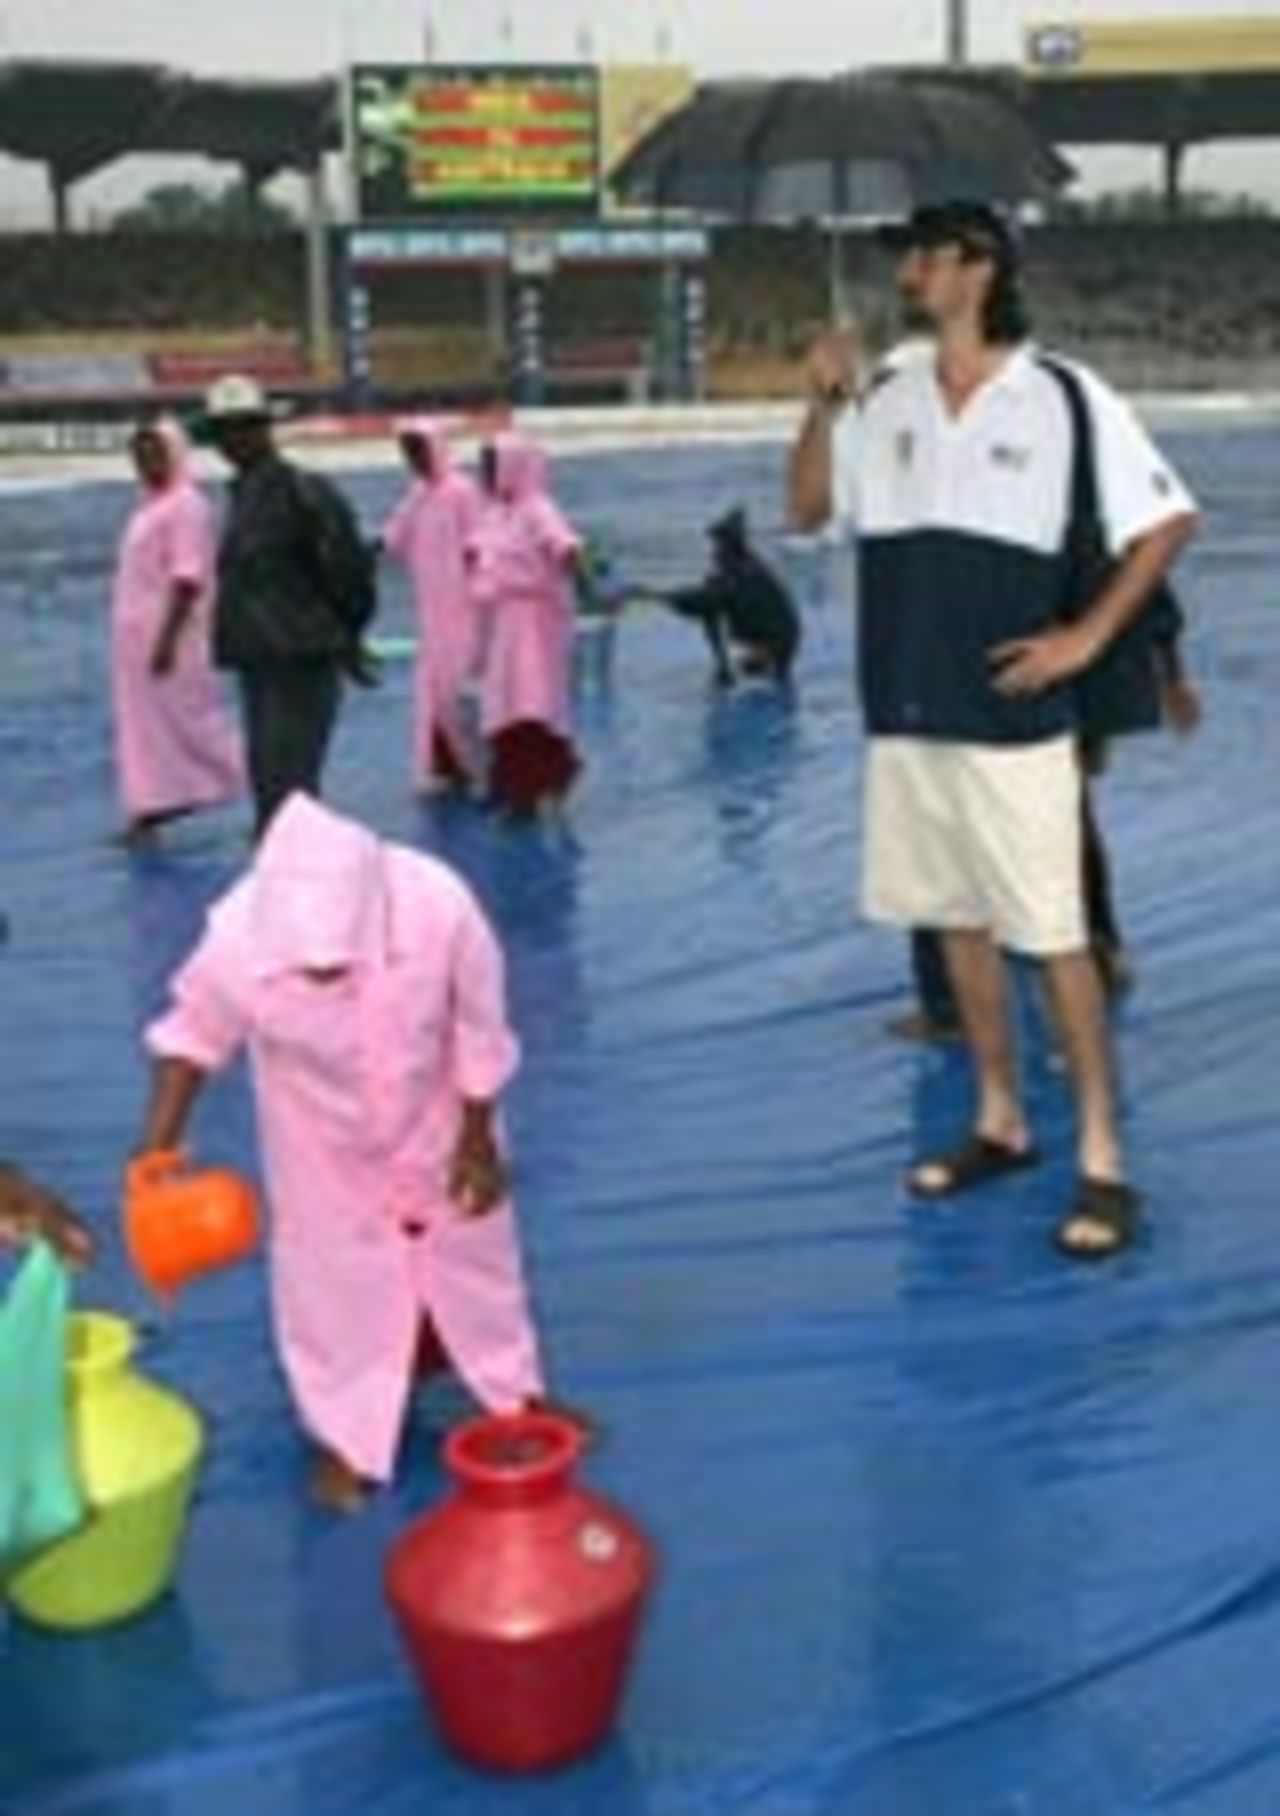 Jason Gillespie with umbrella as mopping-up work continues, India v Australia, 2nd Test, Chennai, 5th day, October 18, 2004